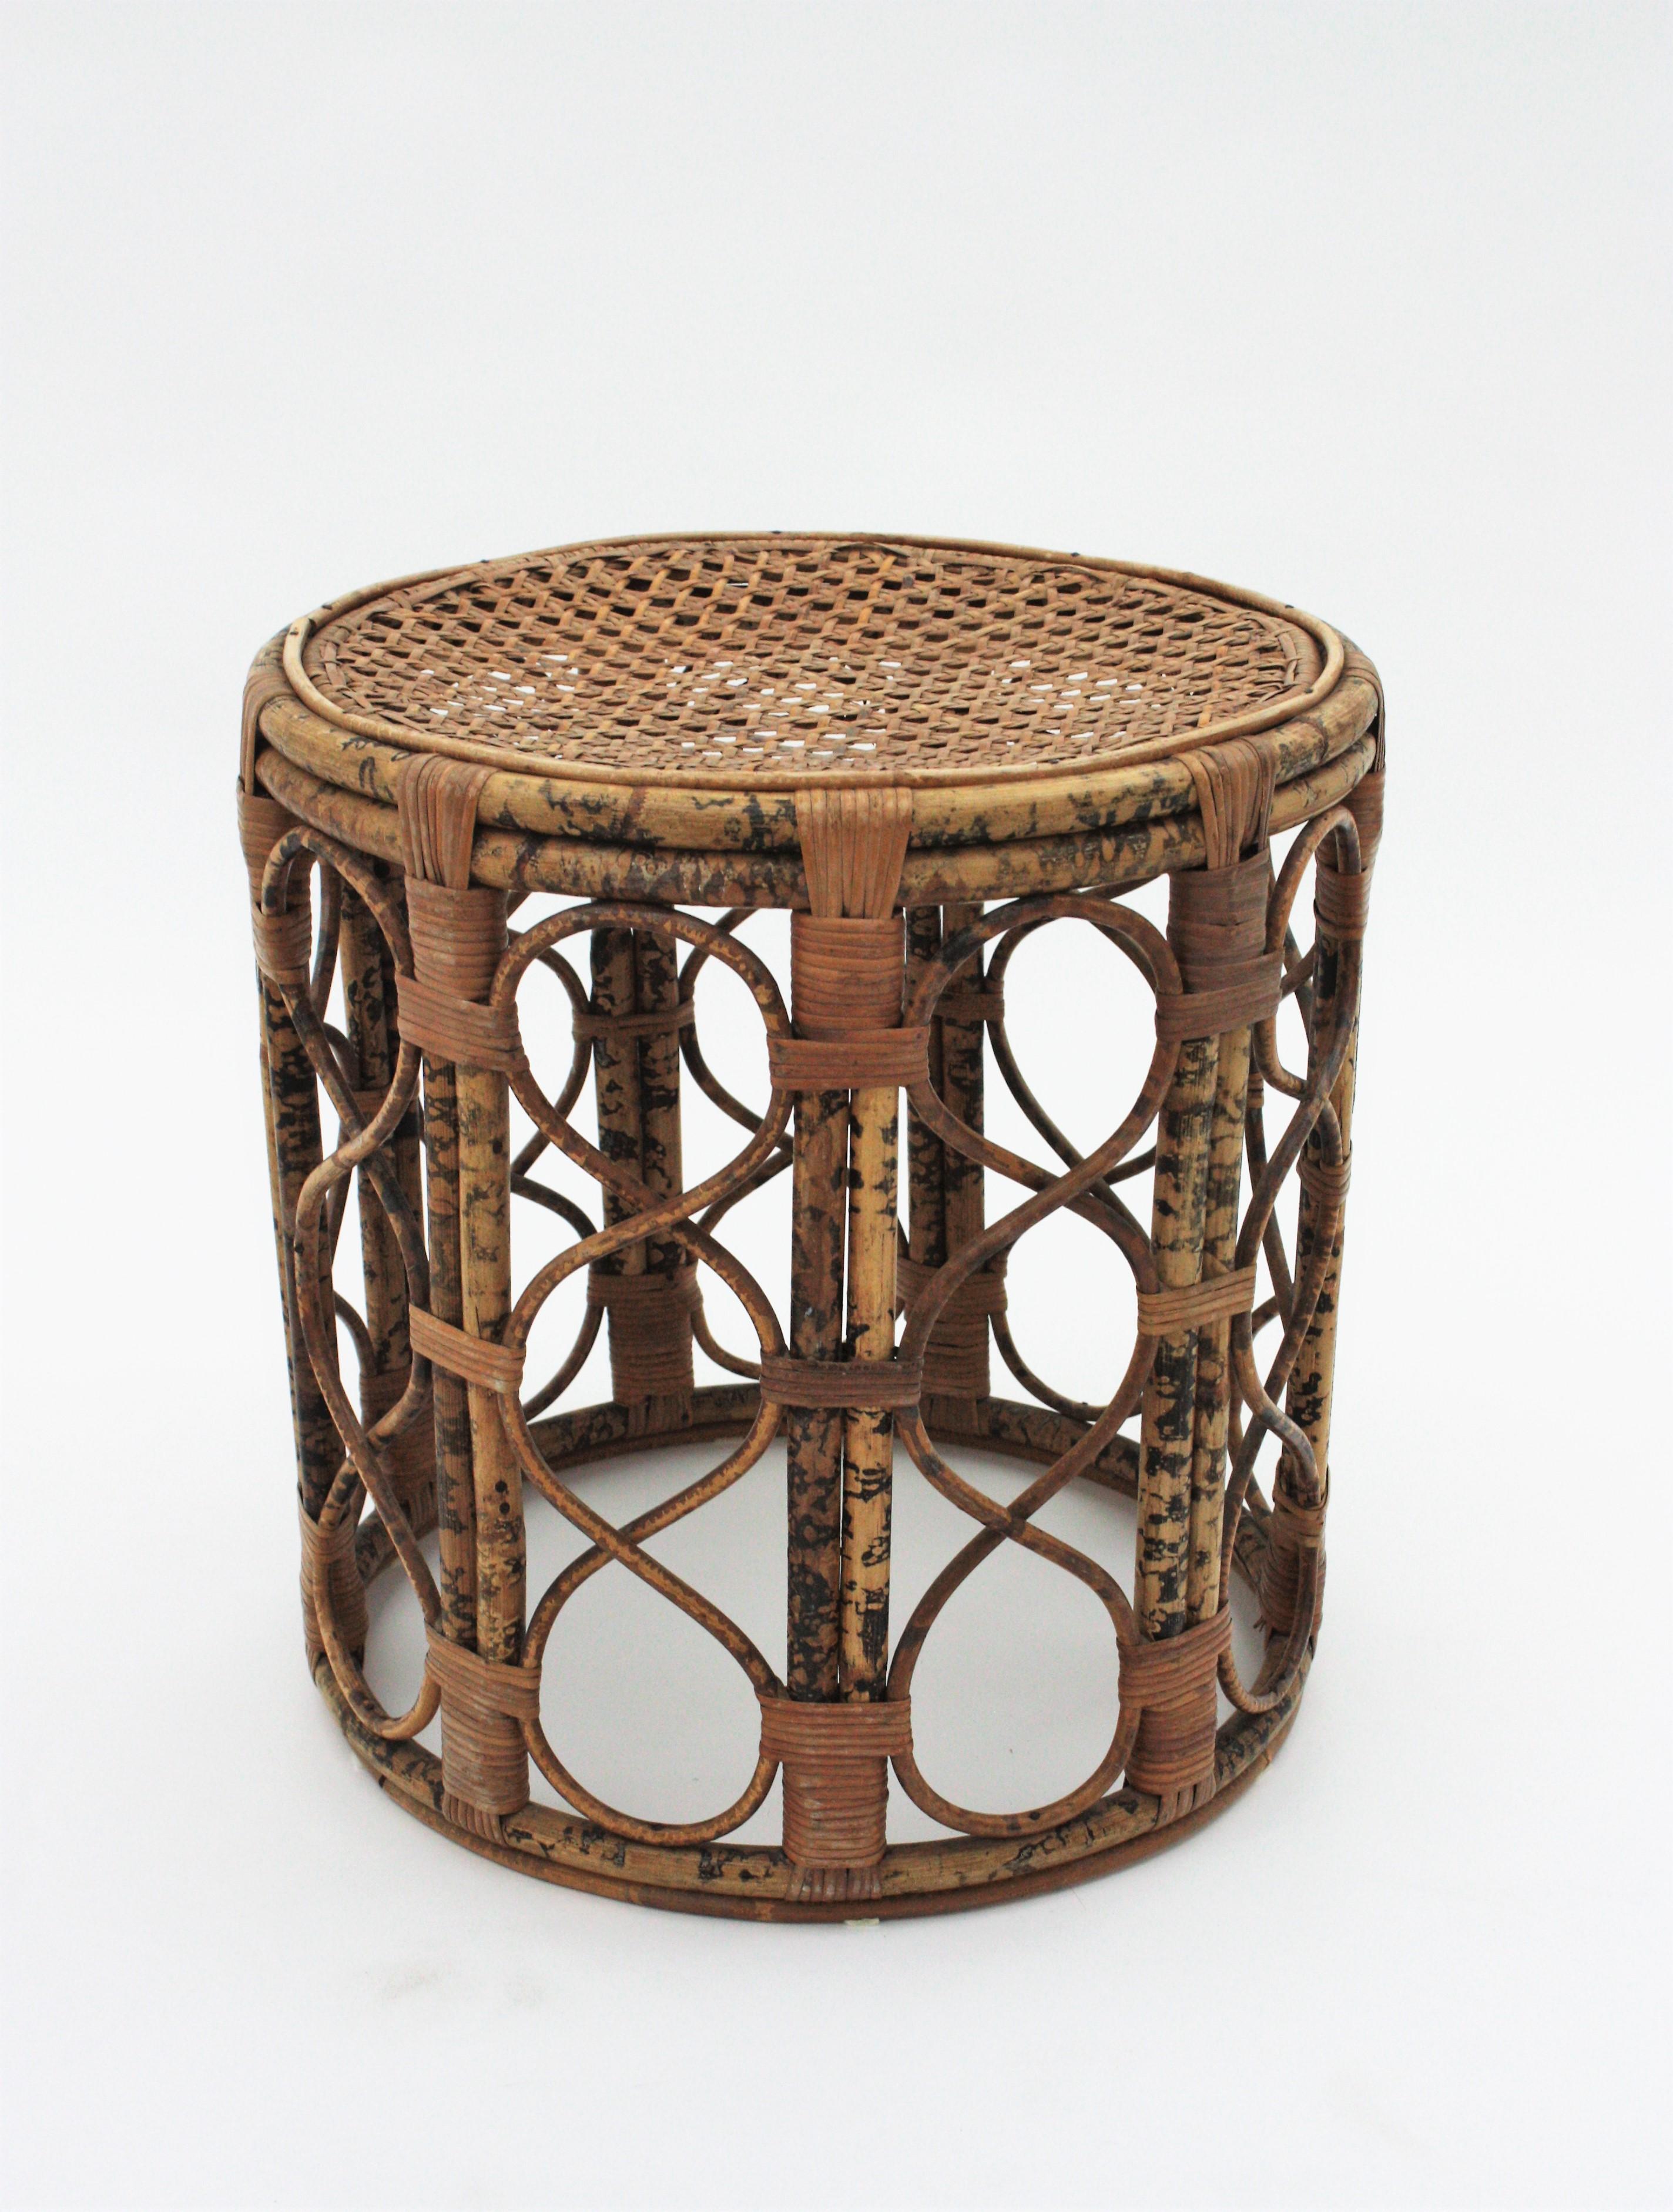 French Side Table or Stool in Tiger Bamboo Rattan with Woven Wicker Top, 1940s For Sale 6